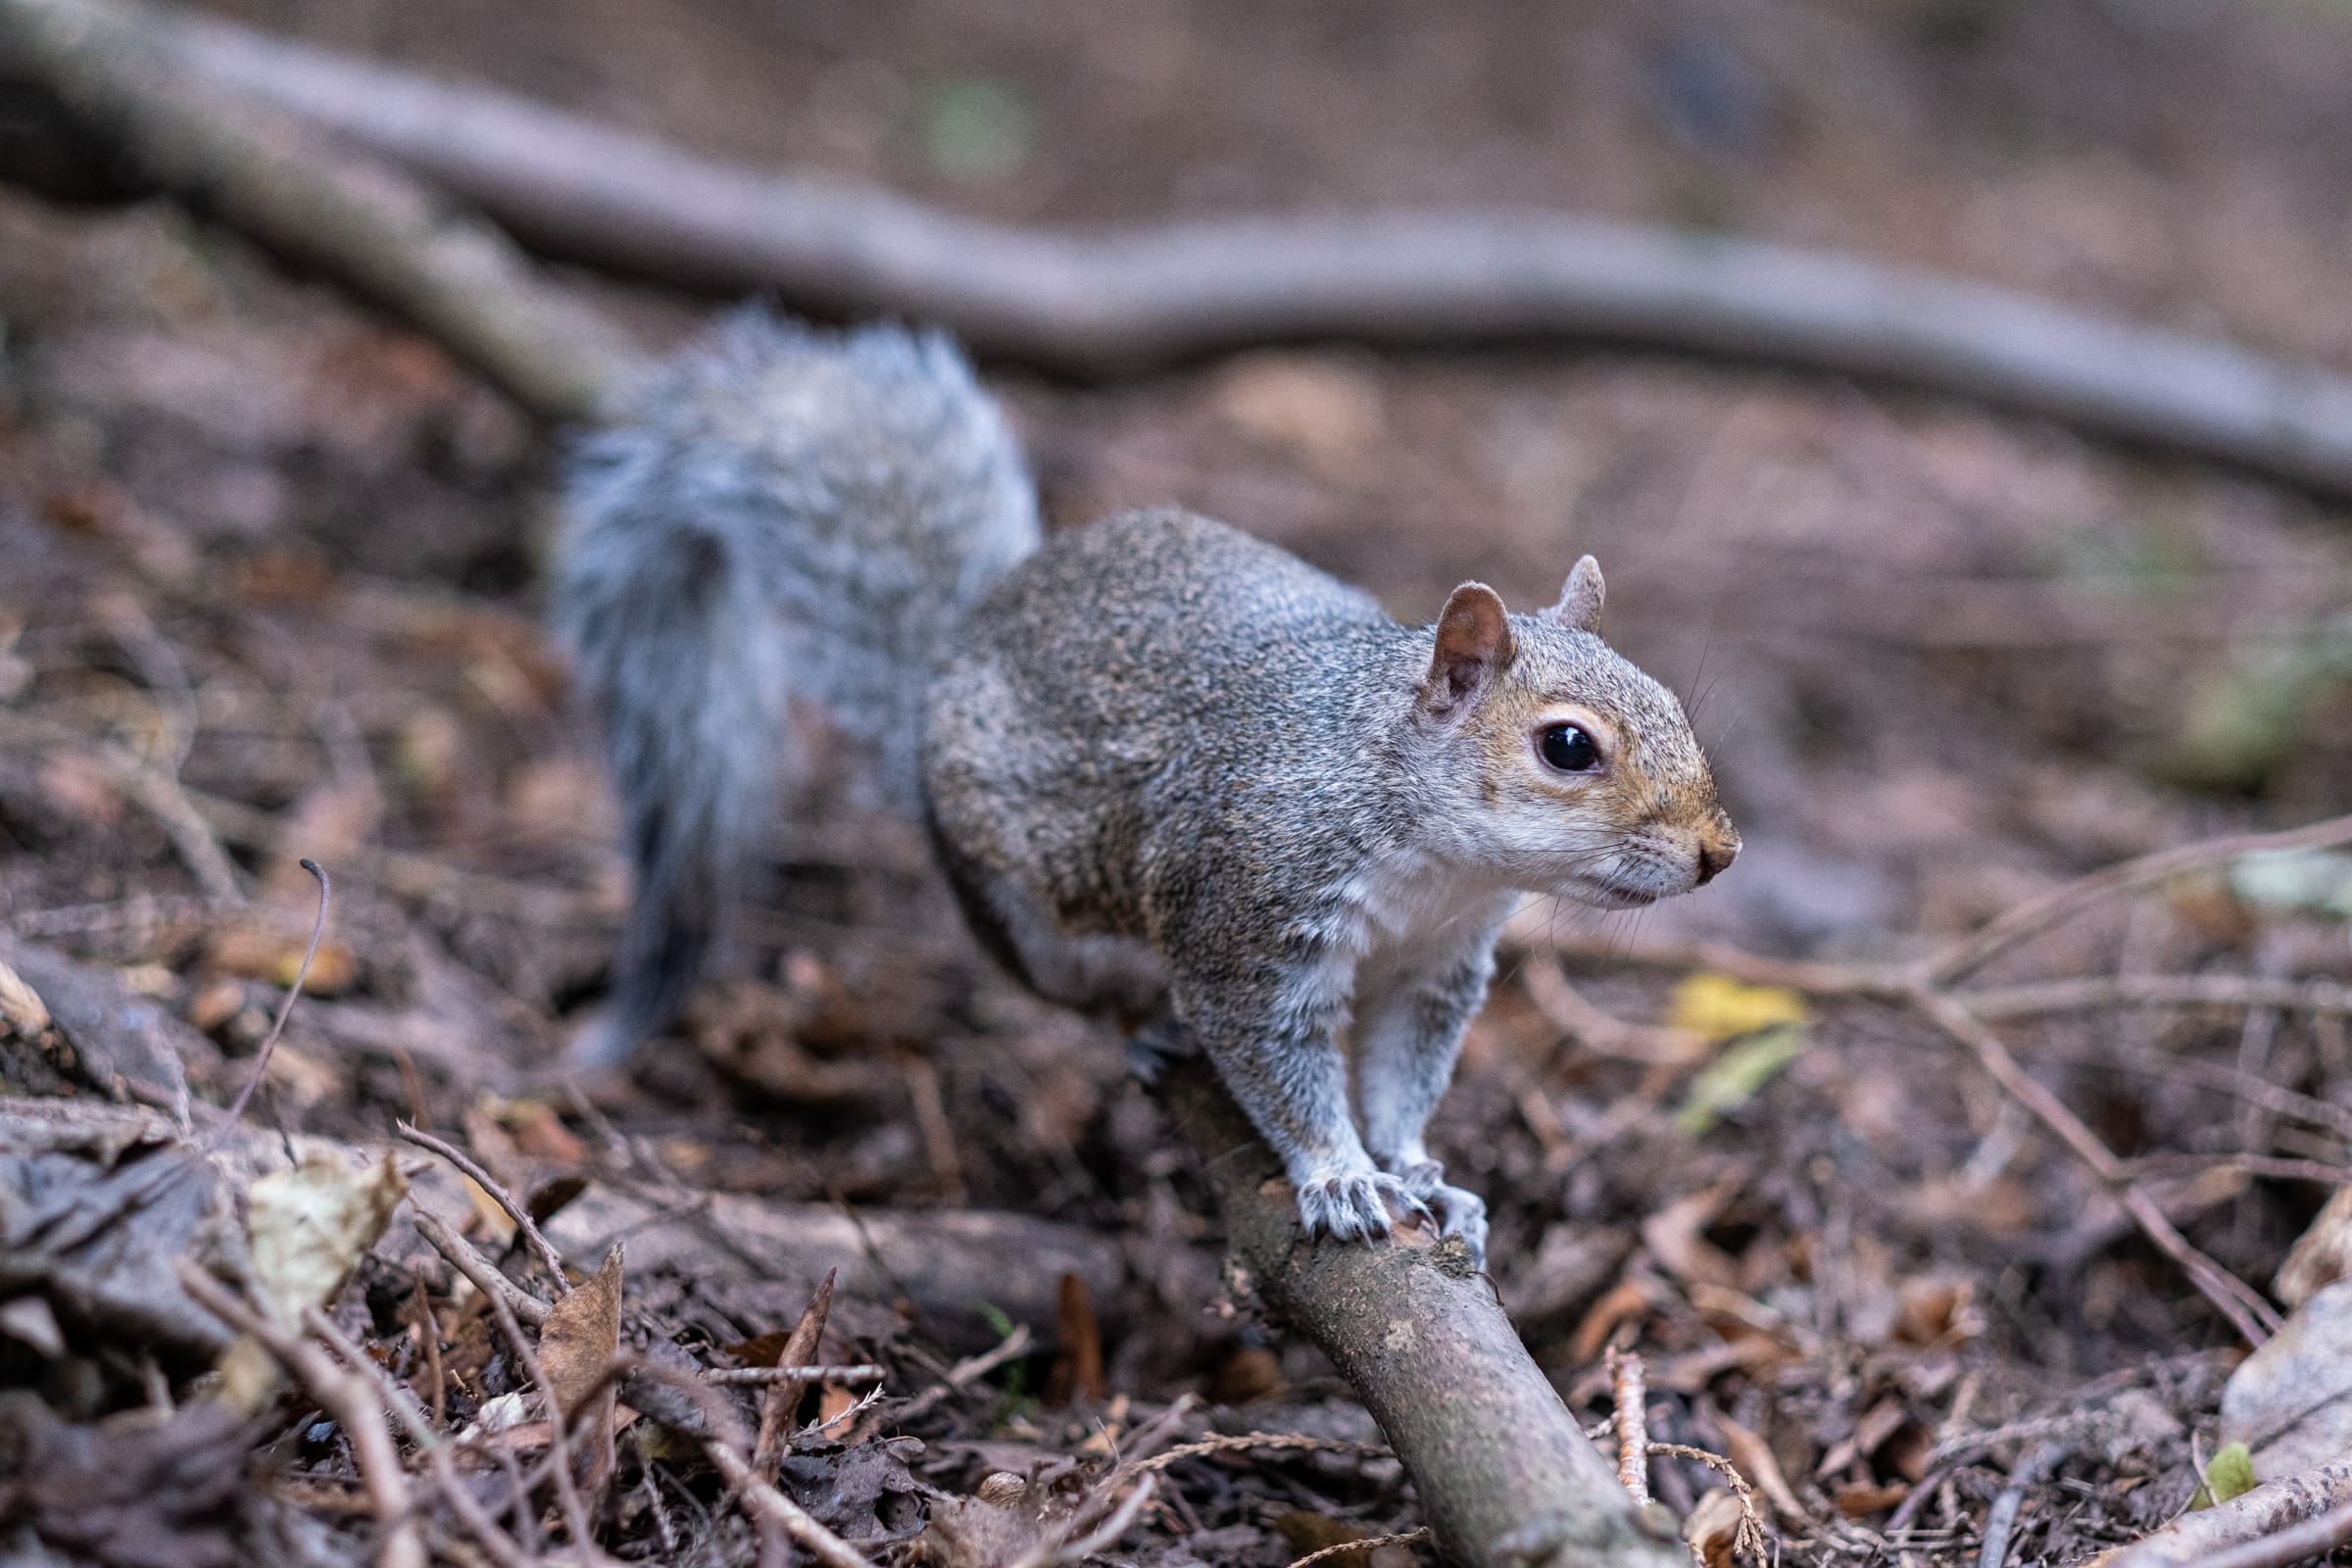 Close-up of a gray squirrel sitting on a dead branch and tilting its head.